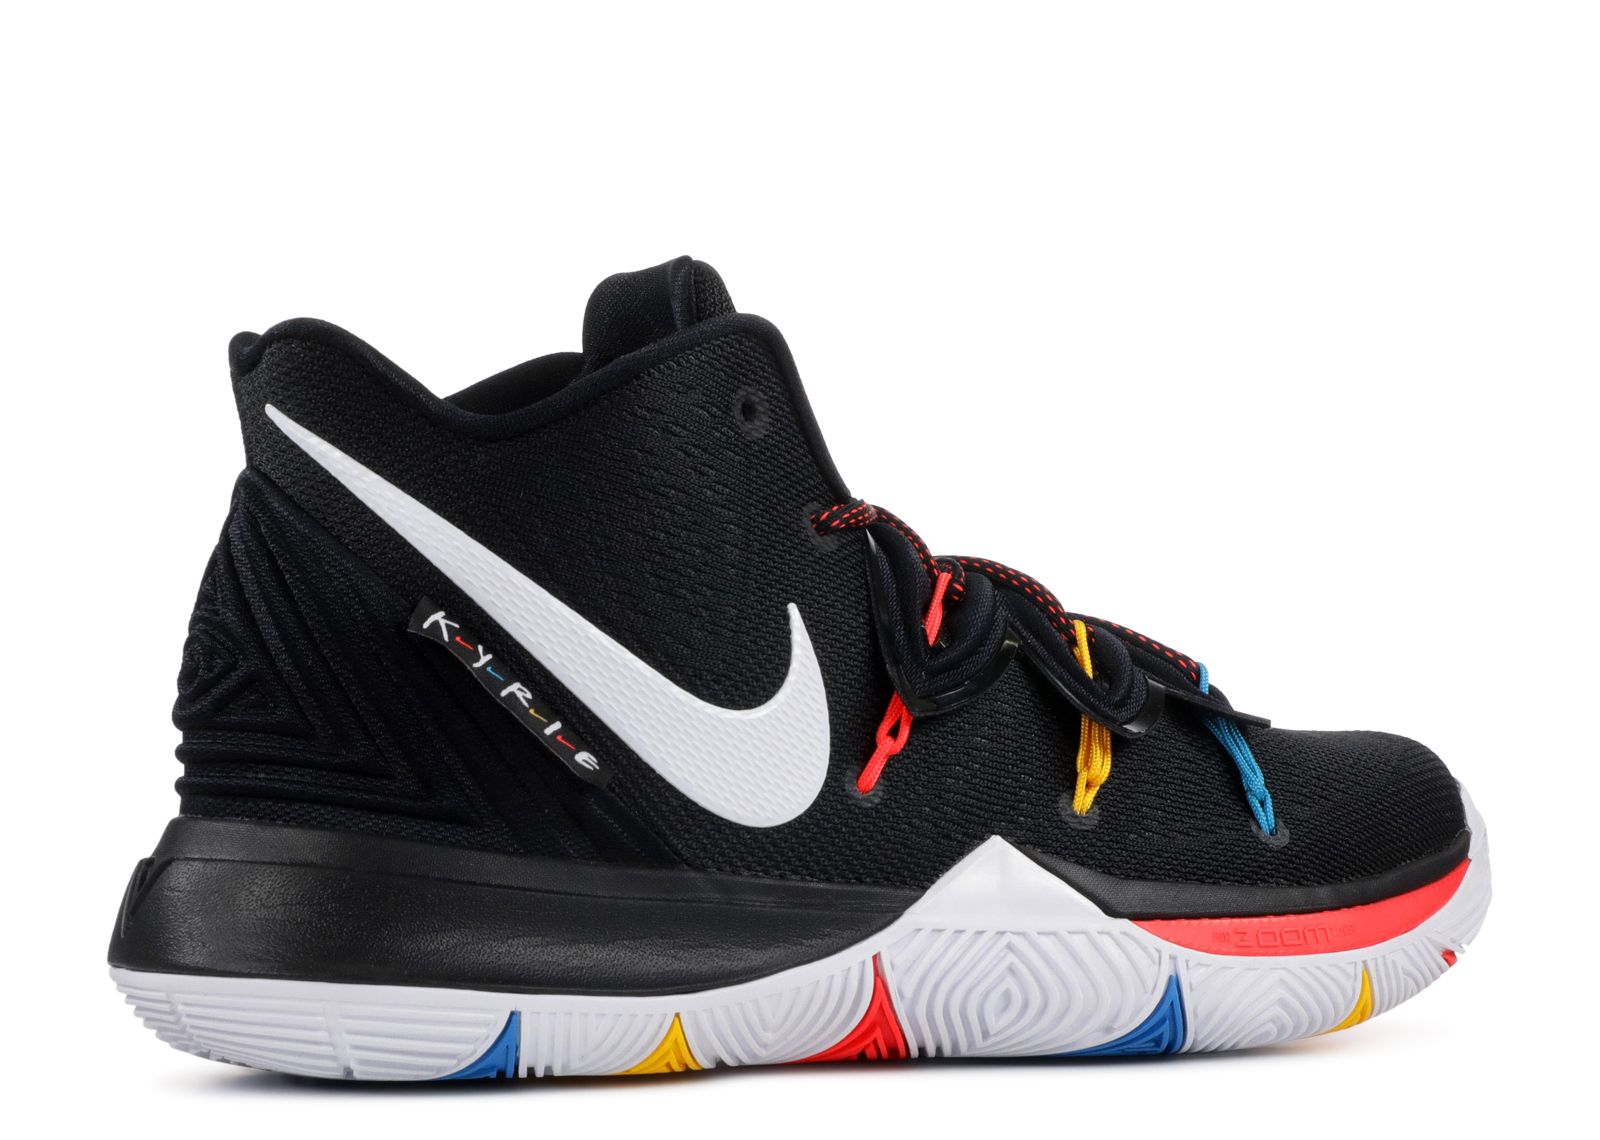 9527 Nike Kyrie 5 Black Magic Black and White Irwin XDR Basketball Shoes AO2919